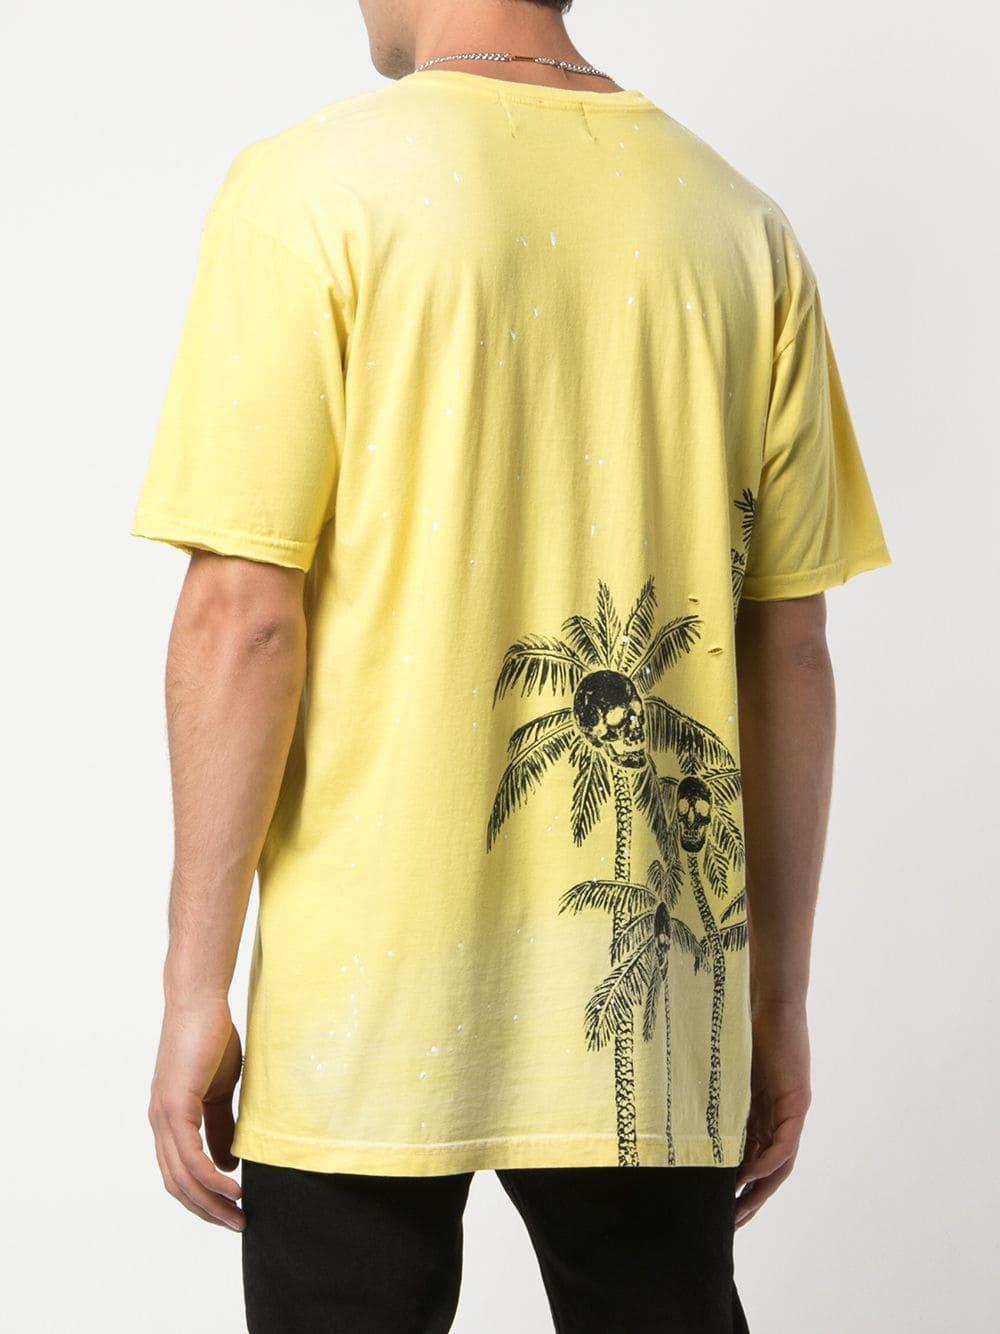 DOMREBEL Skull Palm T-shirt in Yellow for Men - Save 50% - Lyst